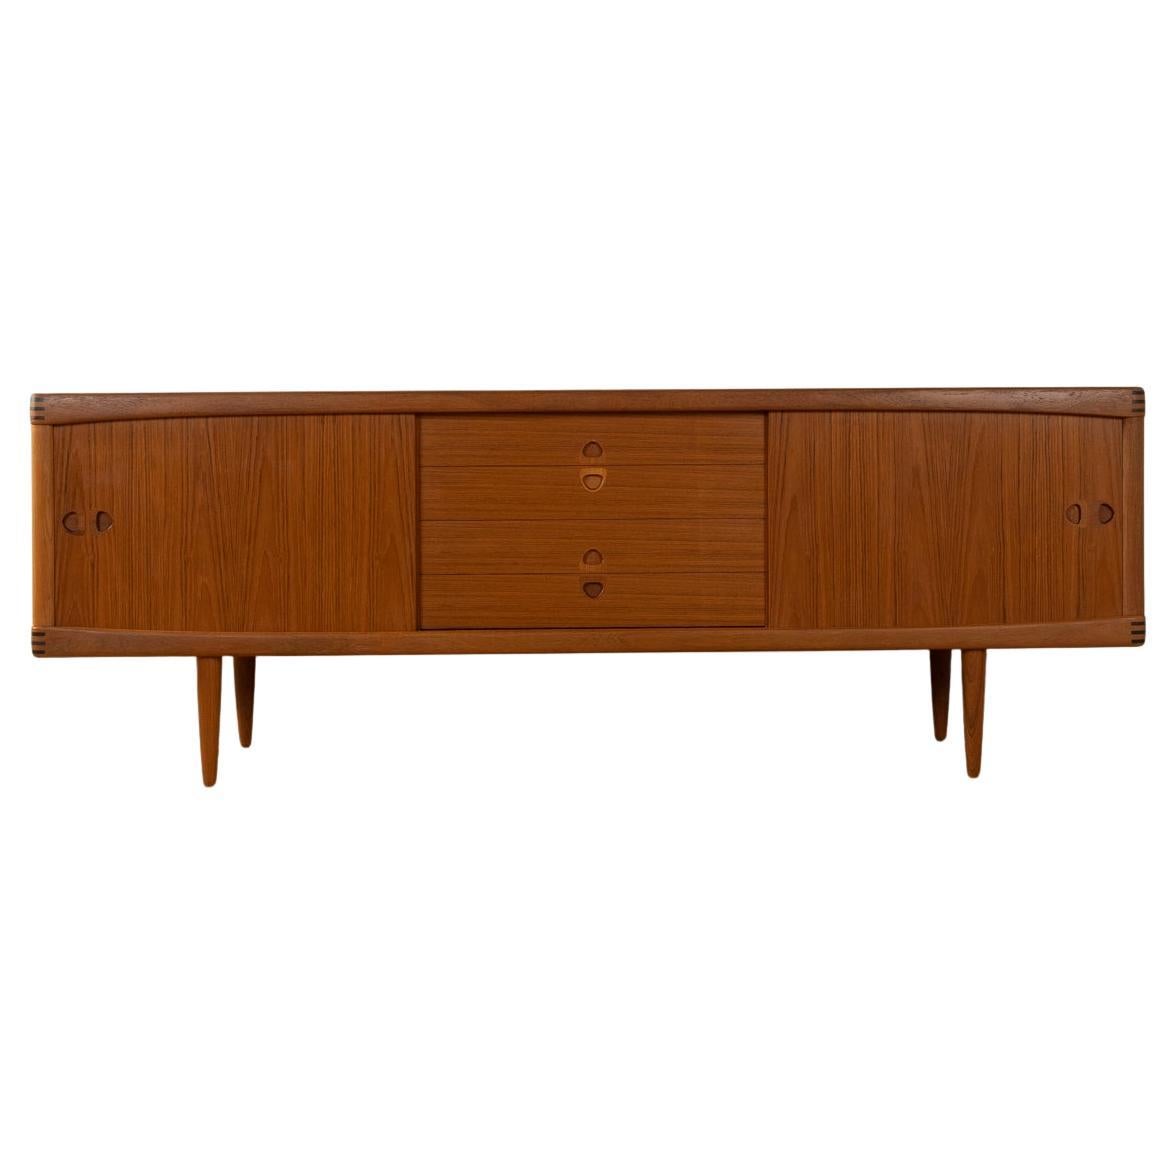 Bramin classic sideboard For Sale